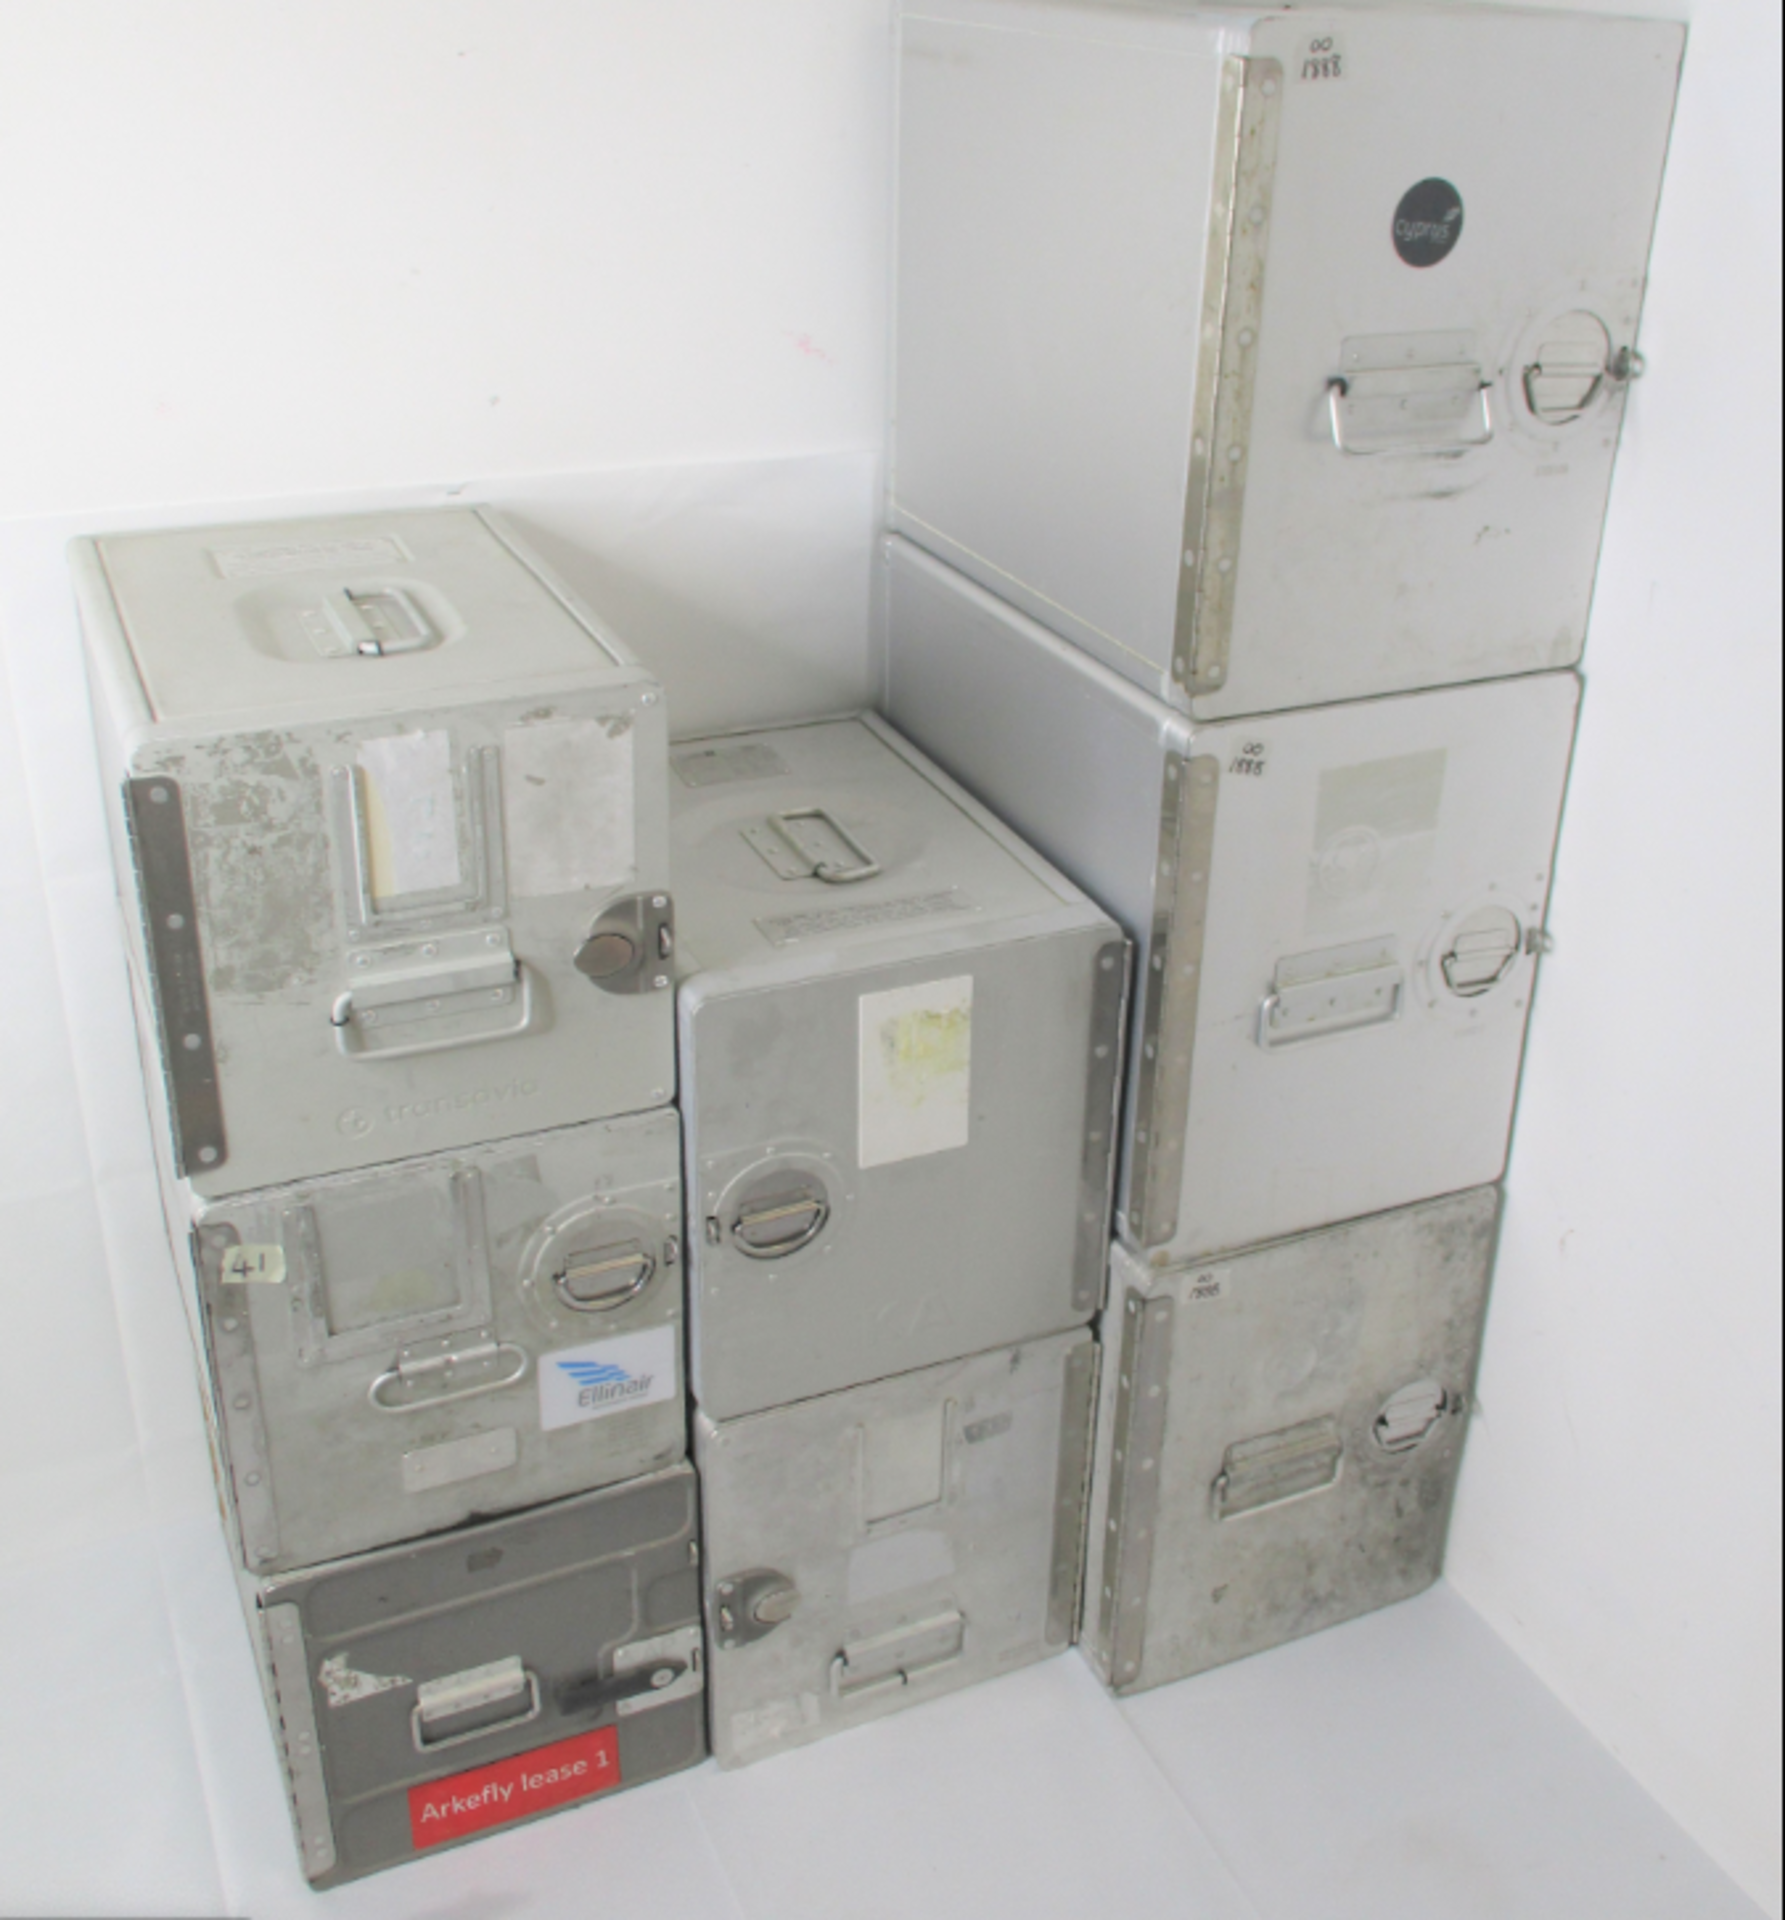 Aircraft Galley Metal Stowage with content practical and memorable storage - Image 4 of 4